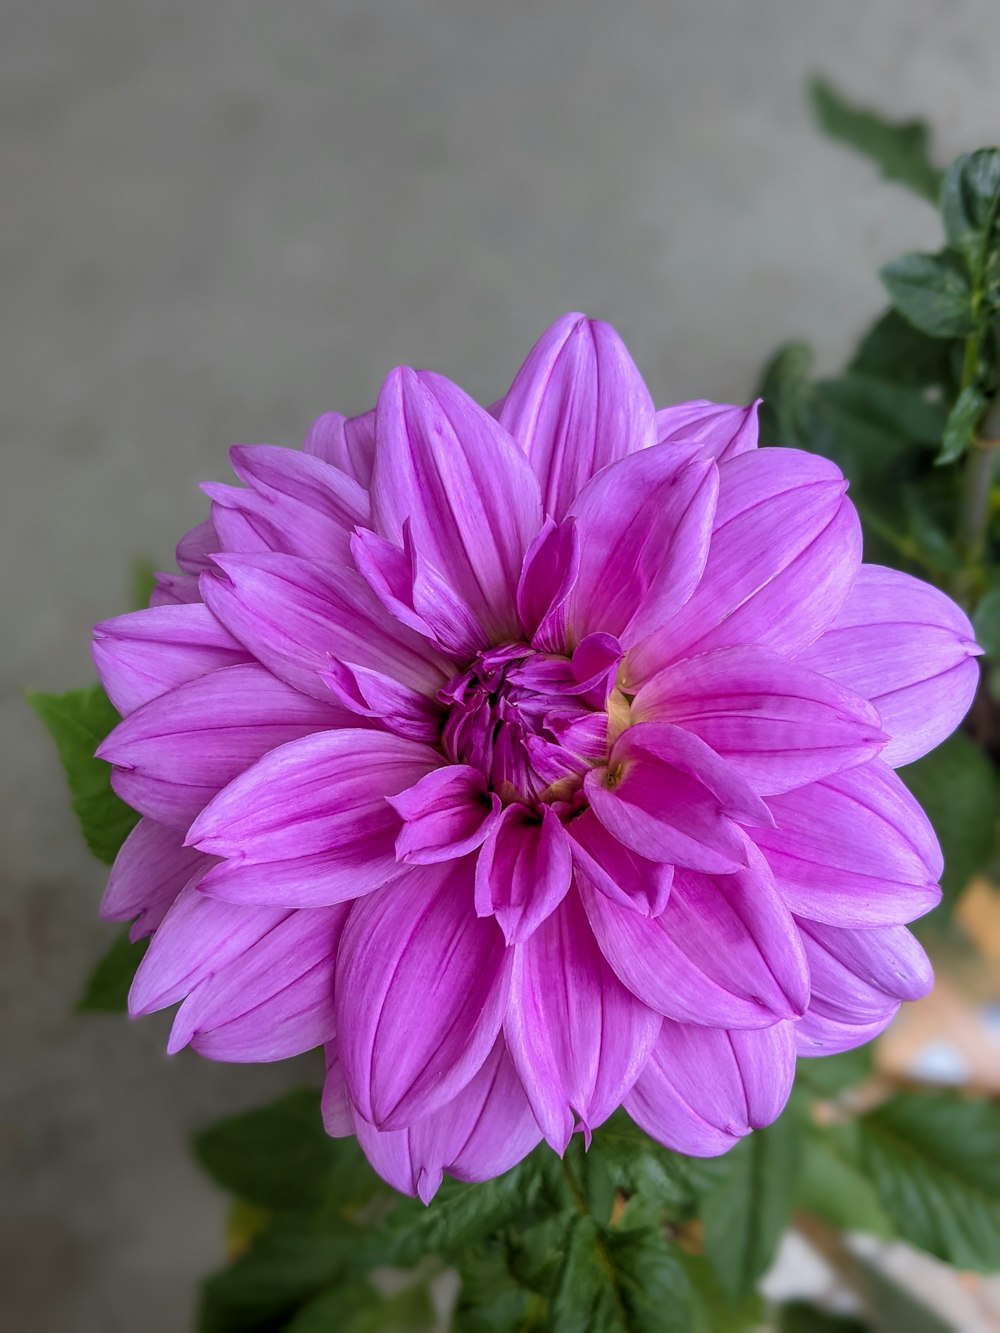 a close up of a purple flower in a vase